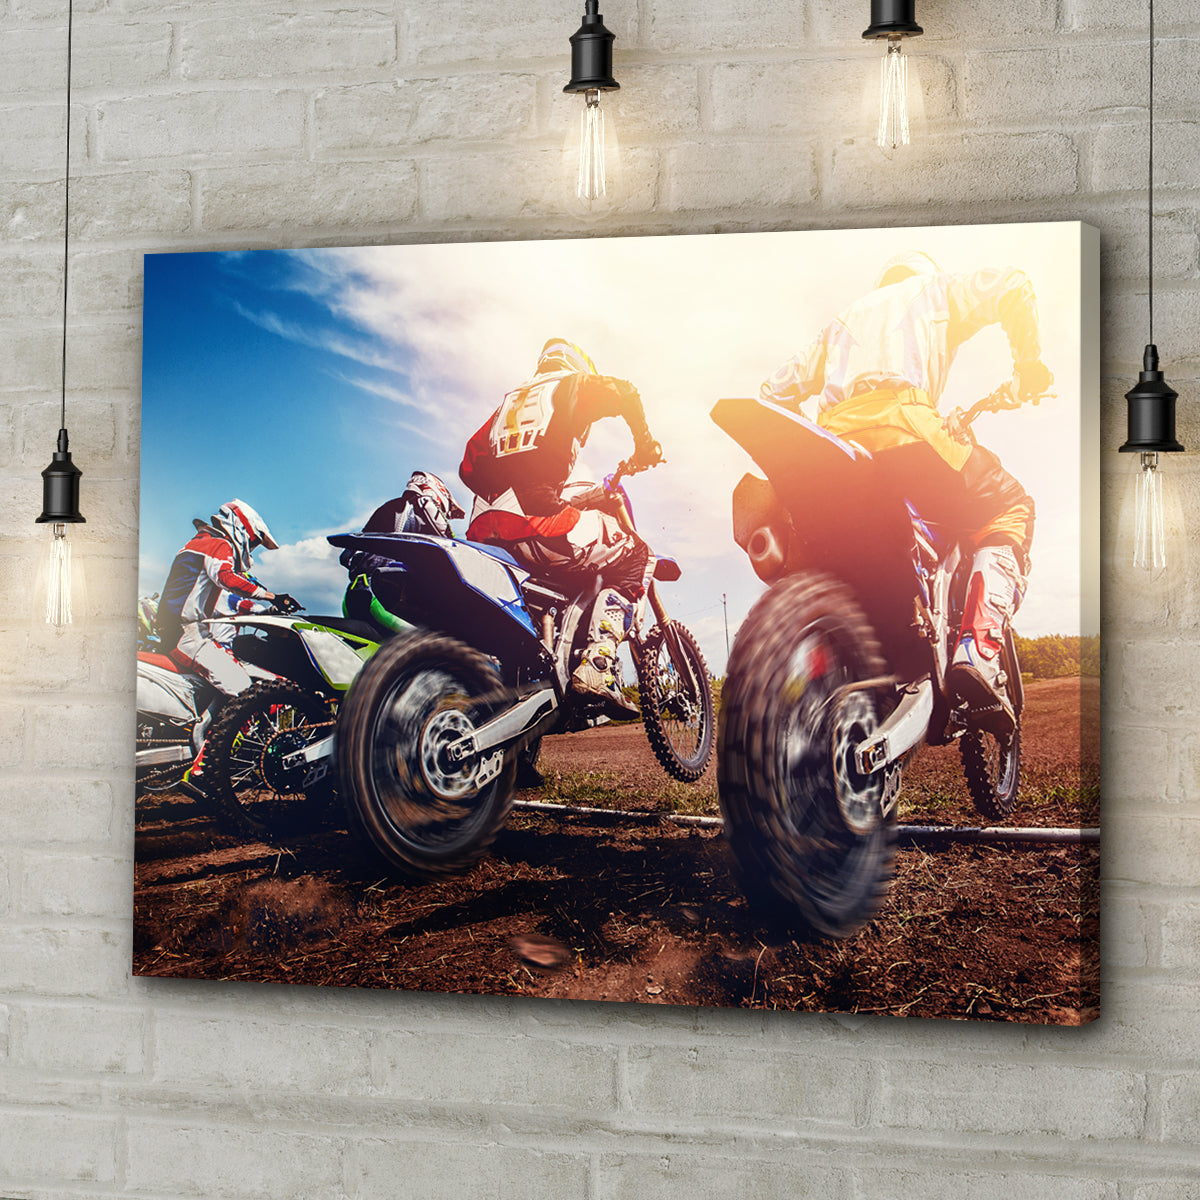 Motocross Race Canvas Wall Art Style 2 - Image by Tailored Canvases